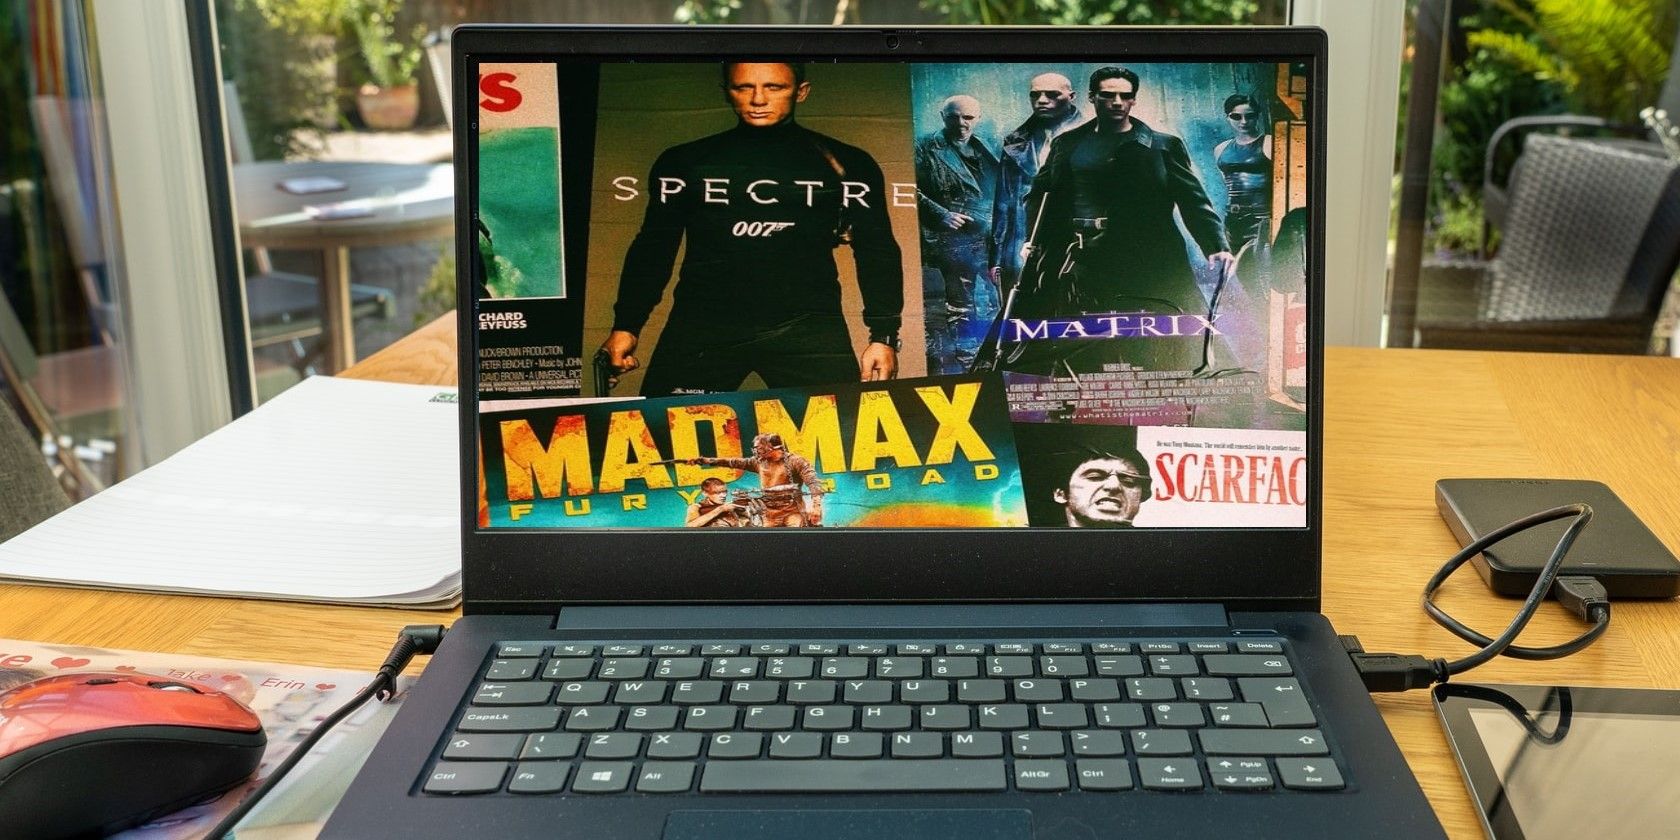 Windows Laptop with Movie Themes on the Screen